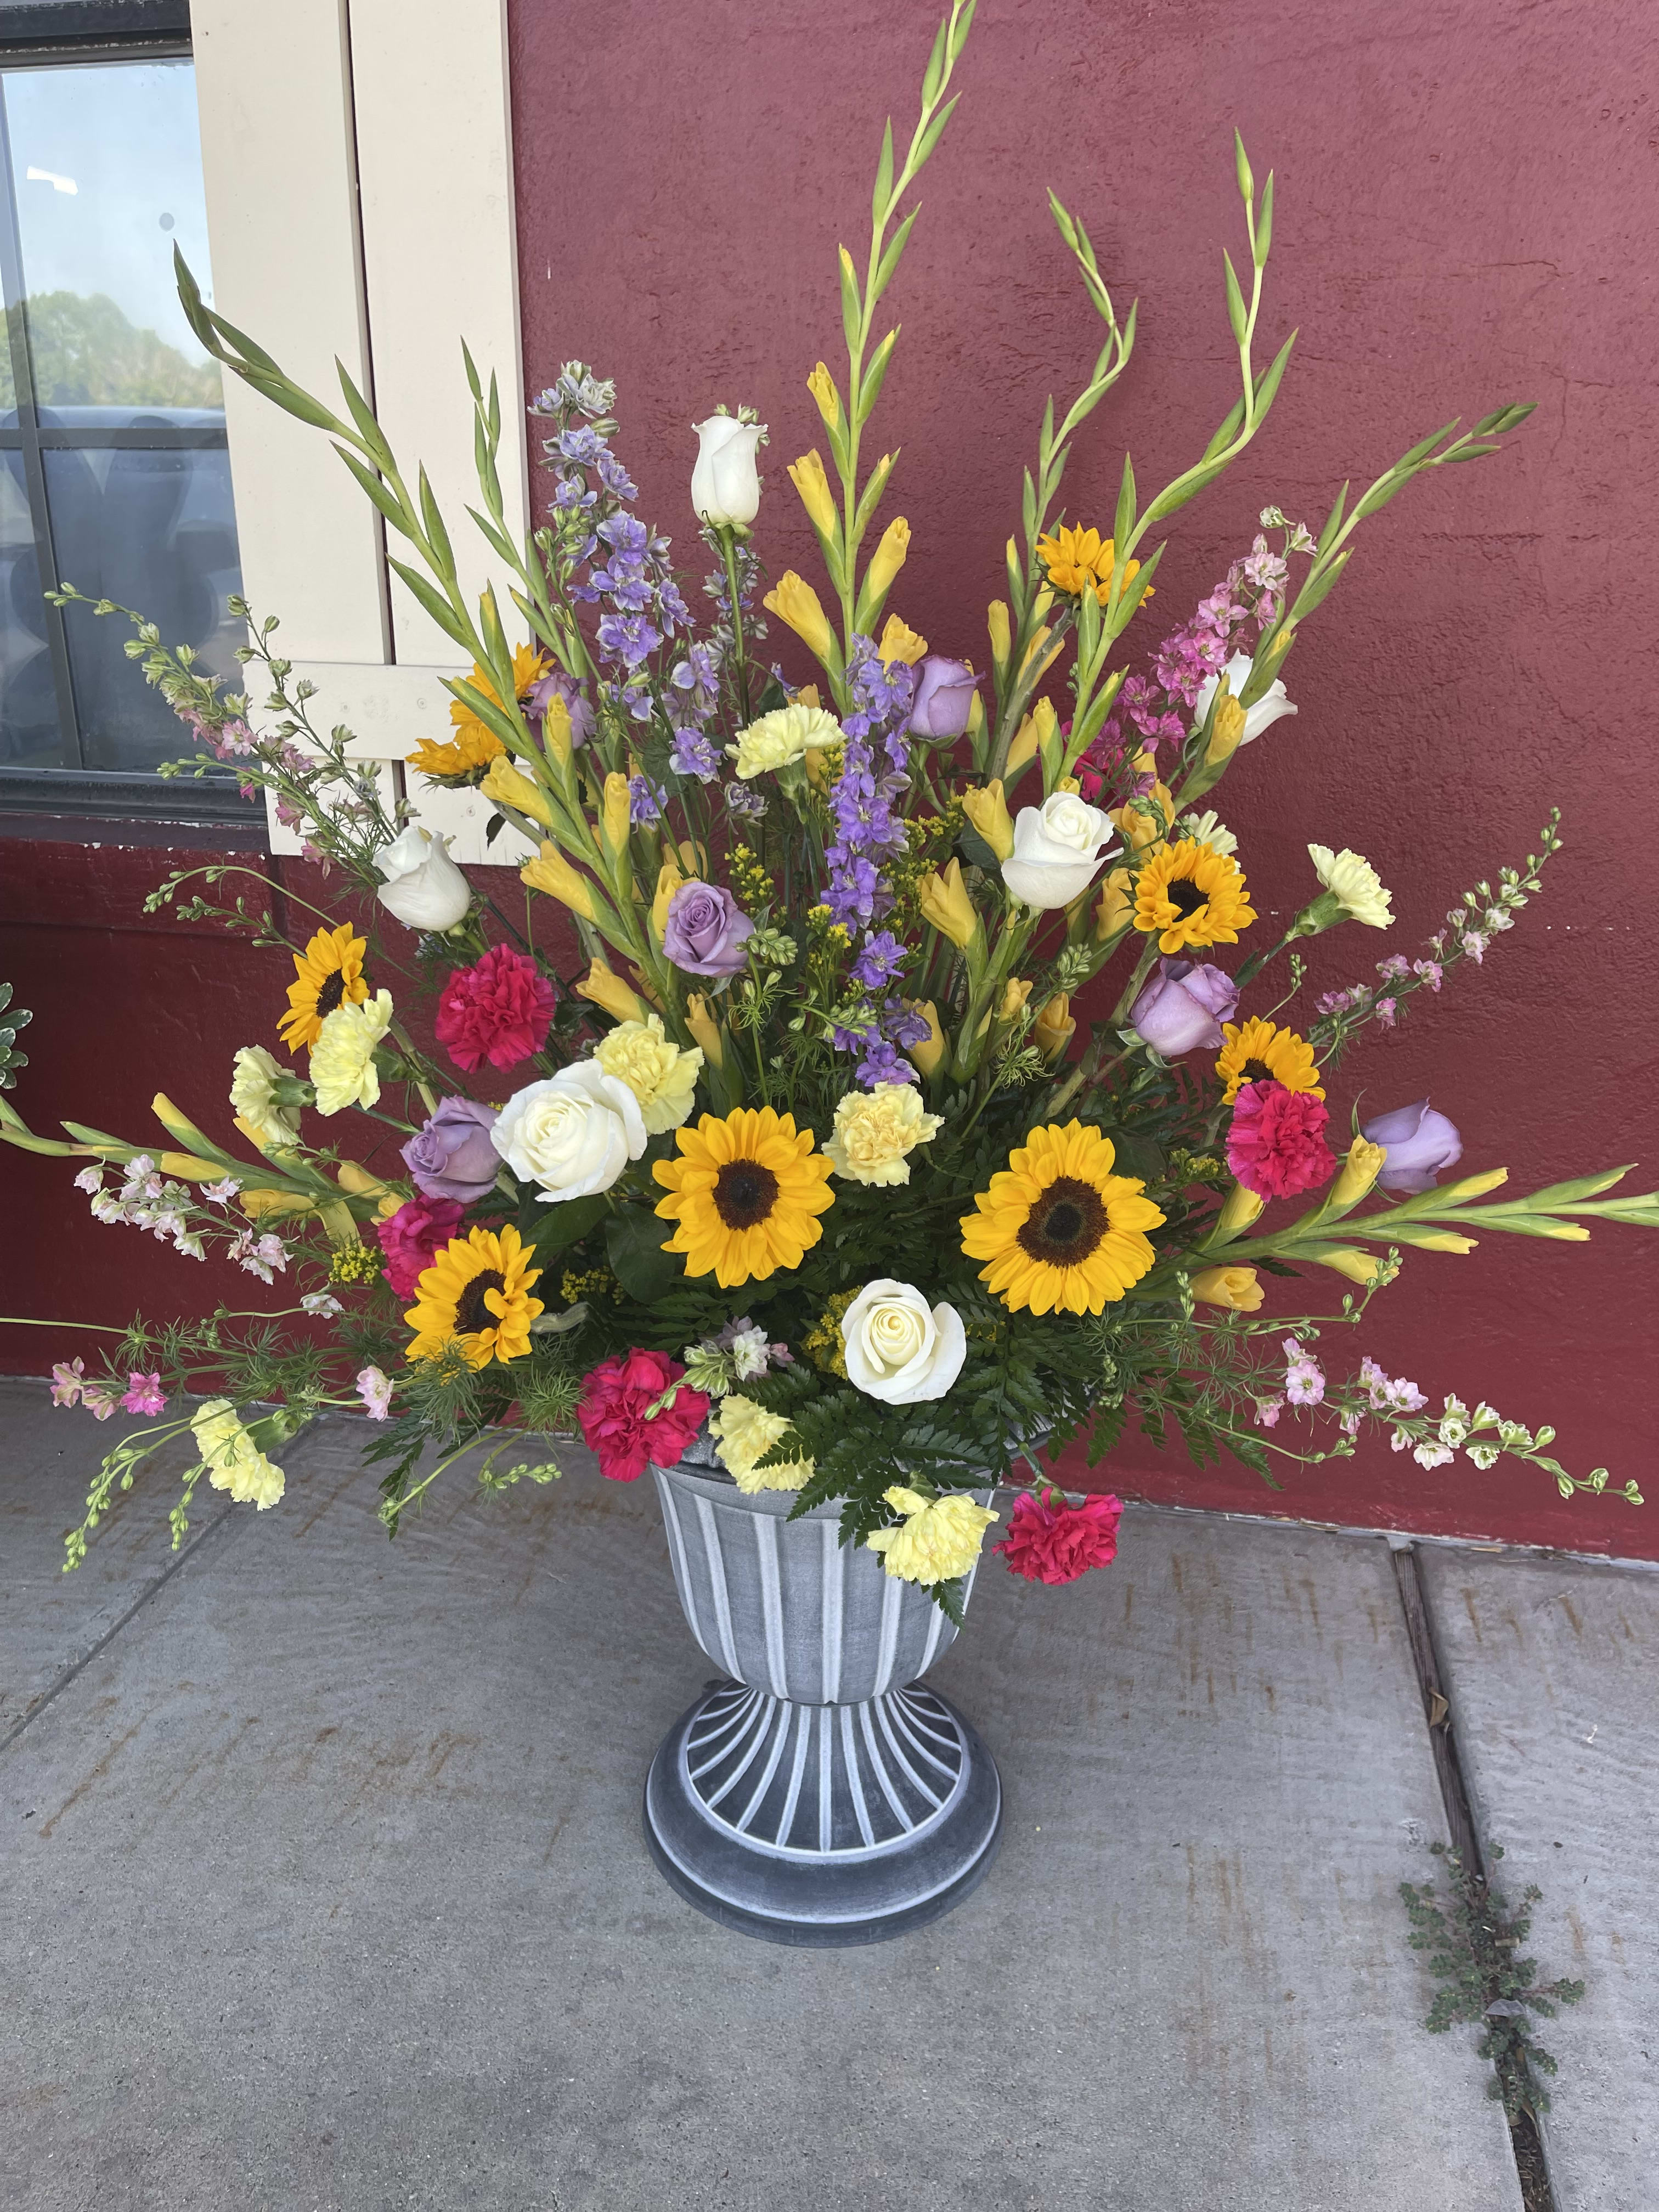 Bold &amp; Beautiful - This design is large! A variety of seasonal flowers in beautiful colors. Makes a grand statement.  (All designs are arranged as similar as possible. We promise to keep the same color, style, and overall theme with what Mother Nature generously blesses us with)